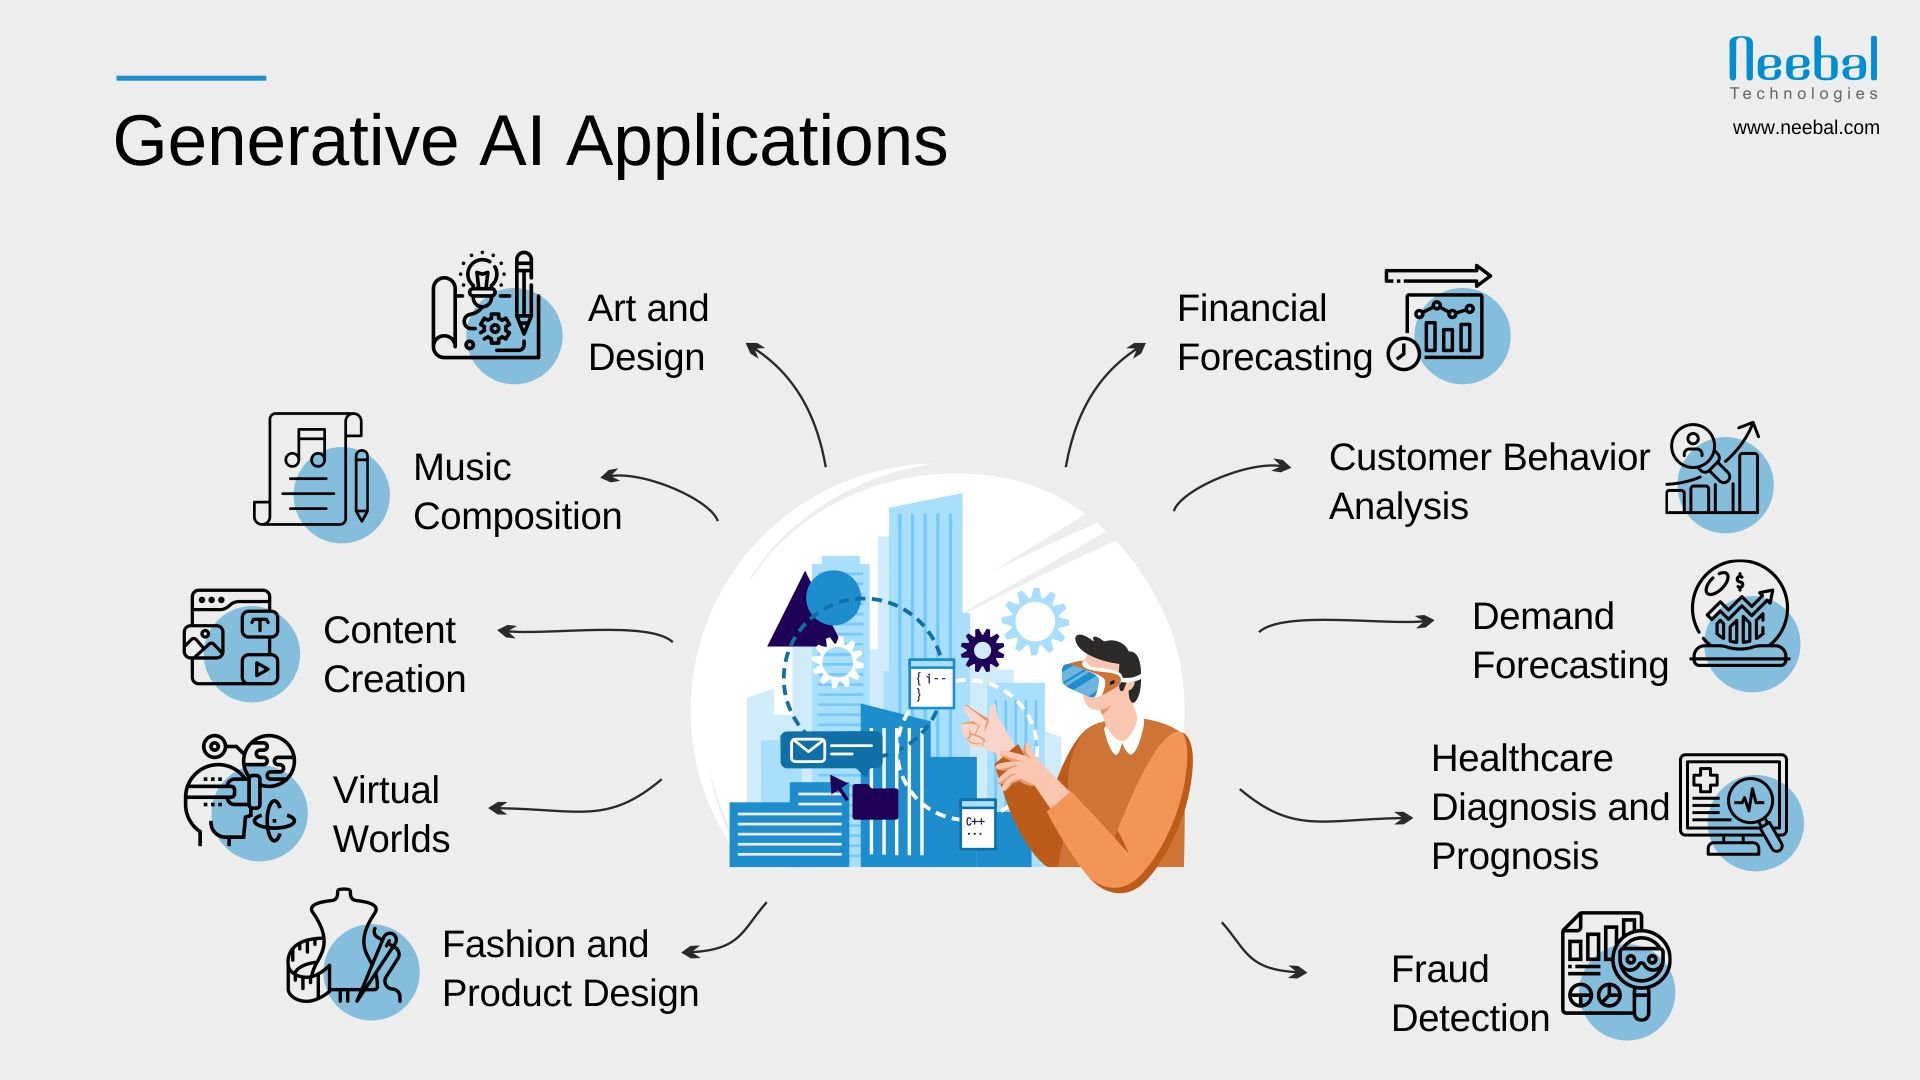  A diagram of generative AI applications in various industries in Australia, including art and design, music composition, content creation, virtual worlds, fashion and product design, financial forecasting, customer behavior analysis, demand forecasting, healthcare diagnosis and prognosis, and fraud detection.